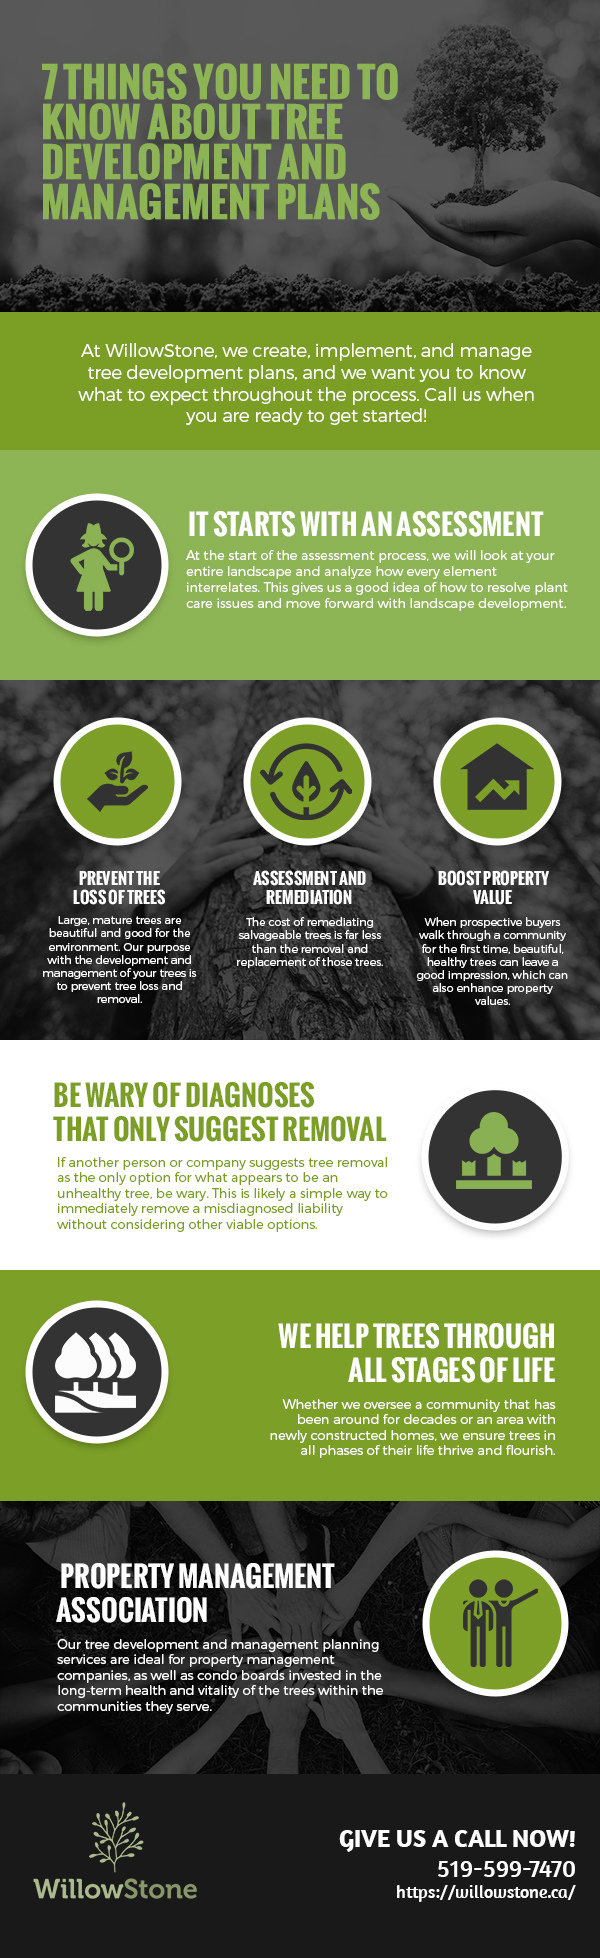 7 Things You Need to Know About Tree Development and Management Plans [infographic]